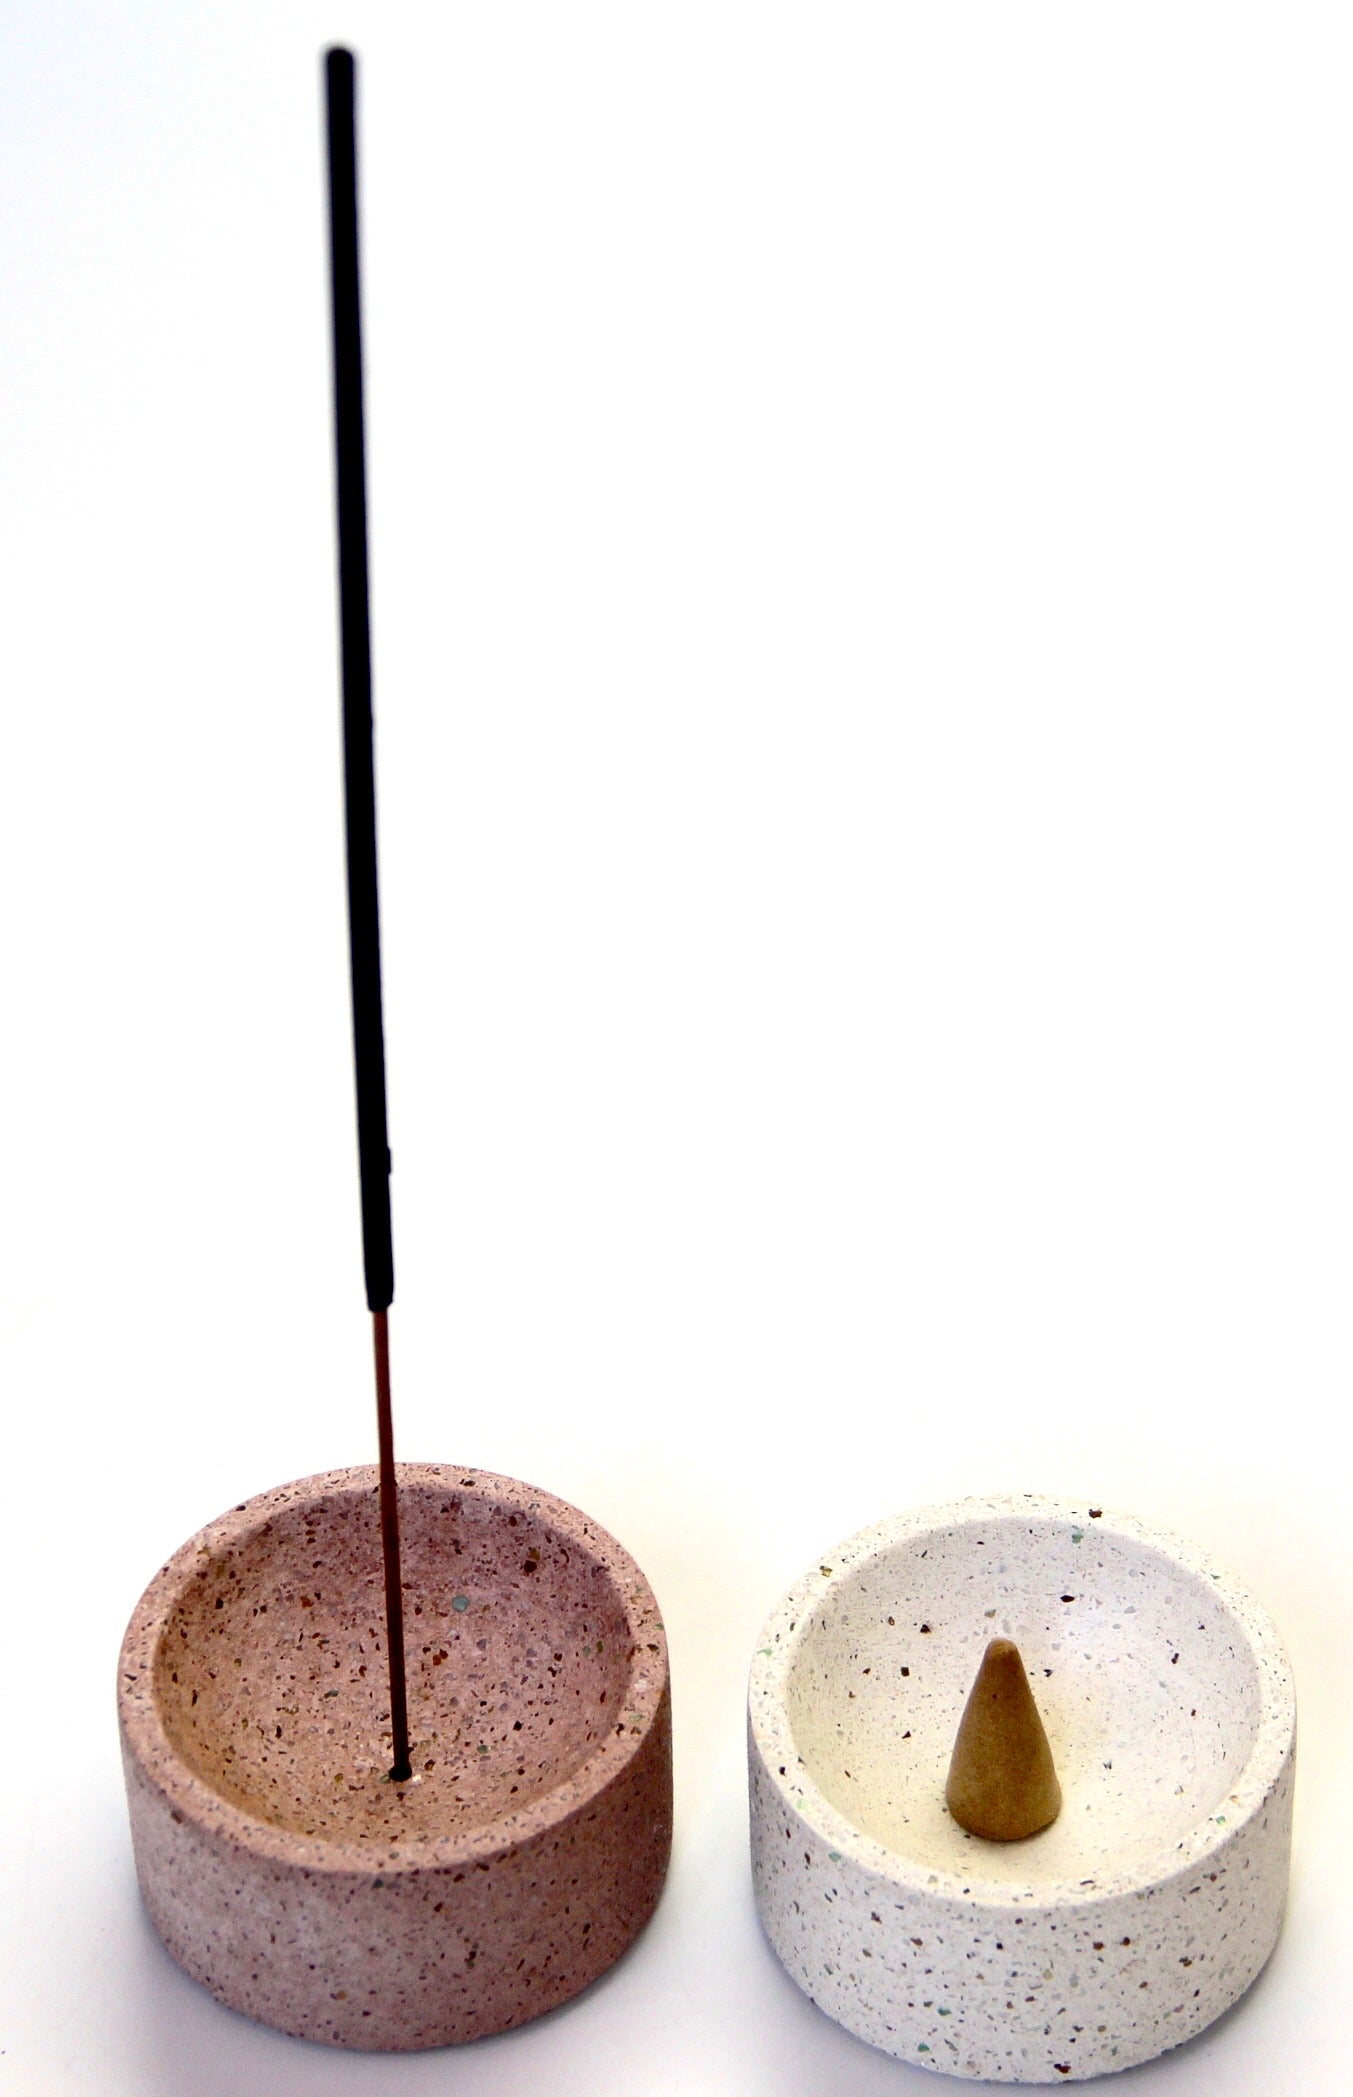 Incense holders